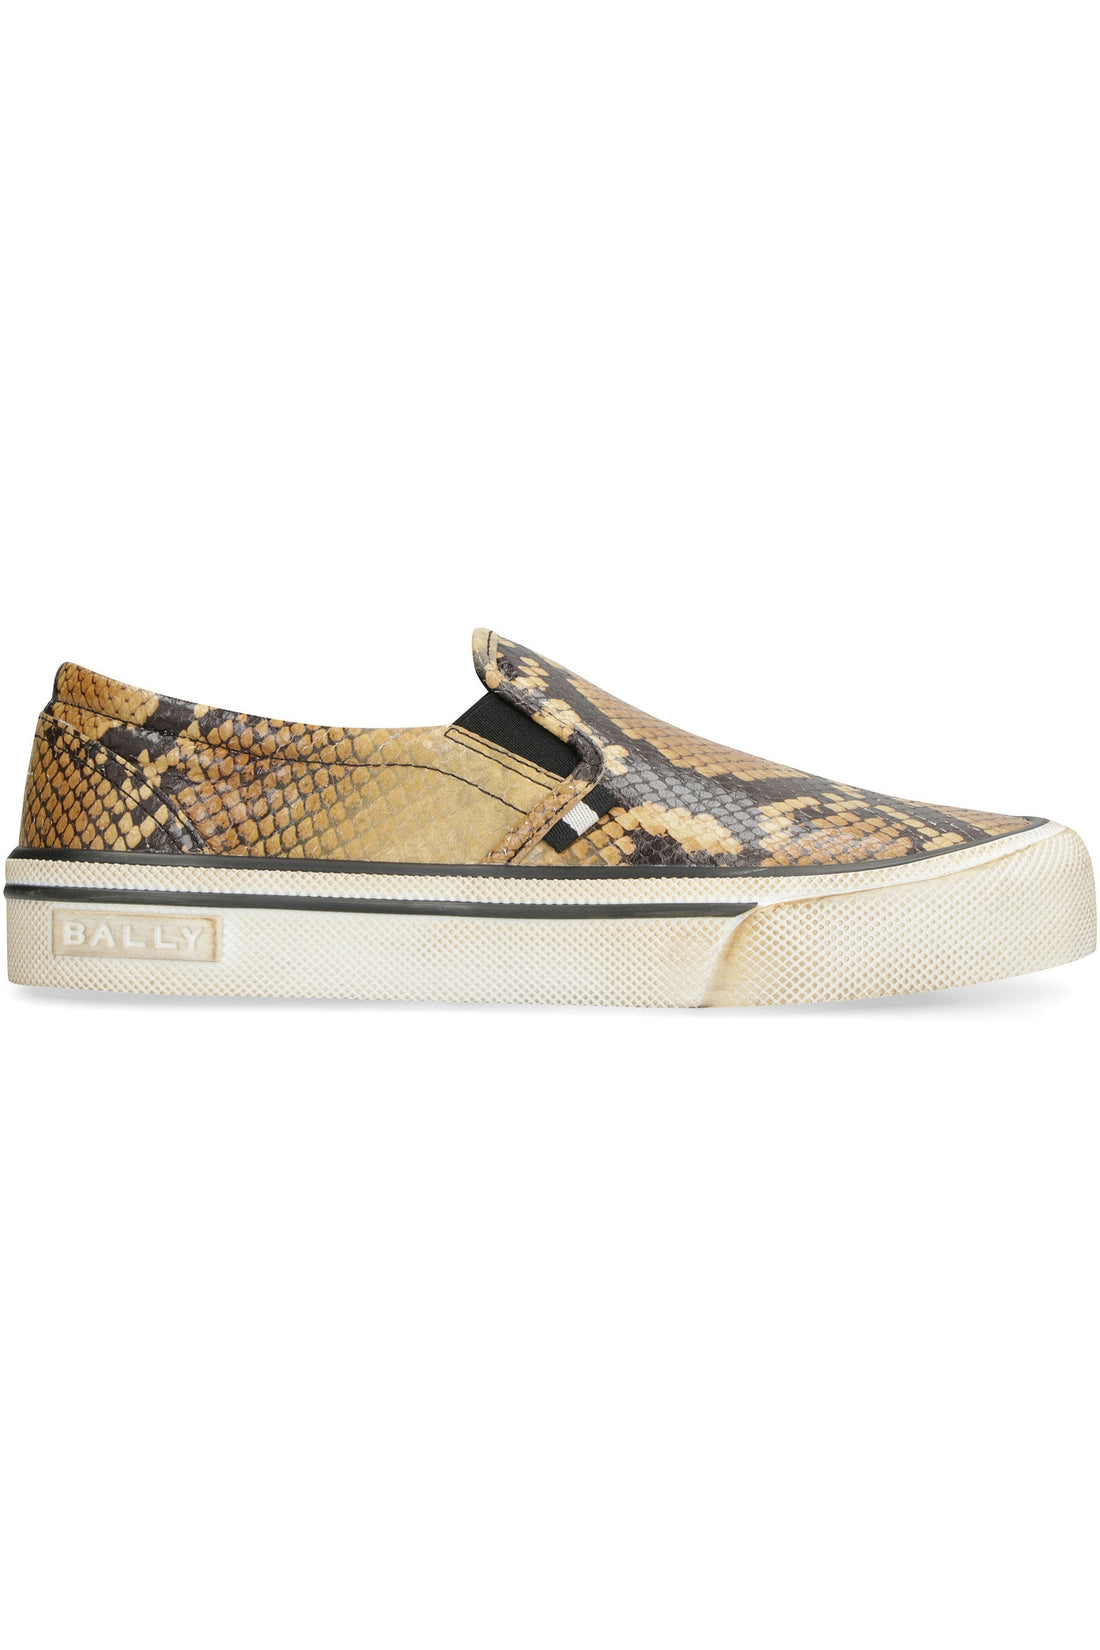 Bally-OUTLET-SALE-Santa Ana printed leather slip-on sneakers-ARCHIVIST